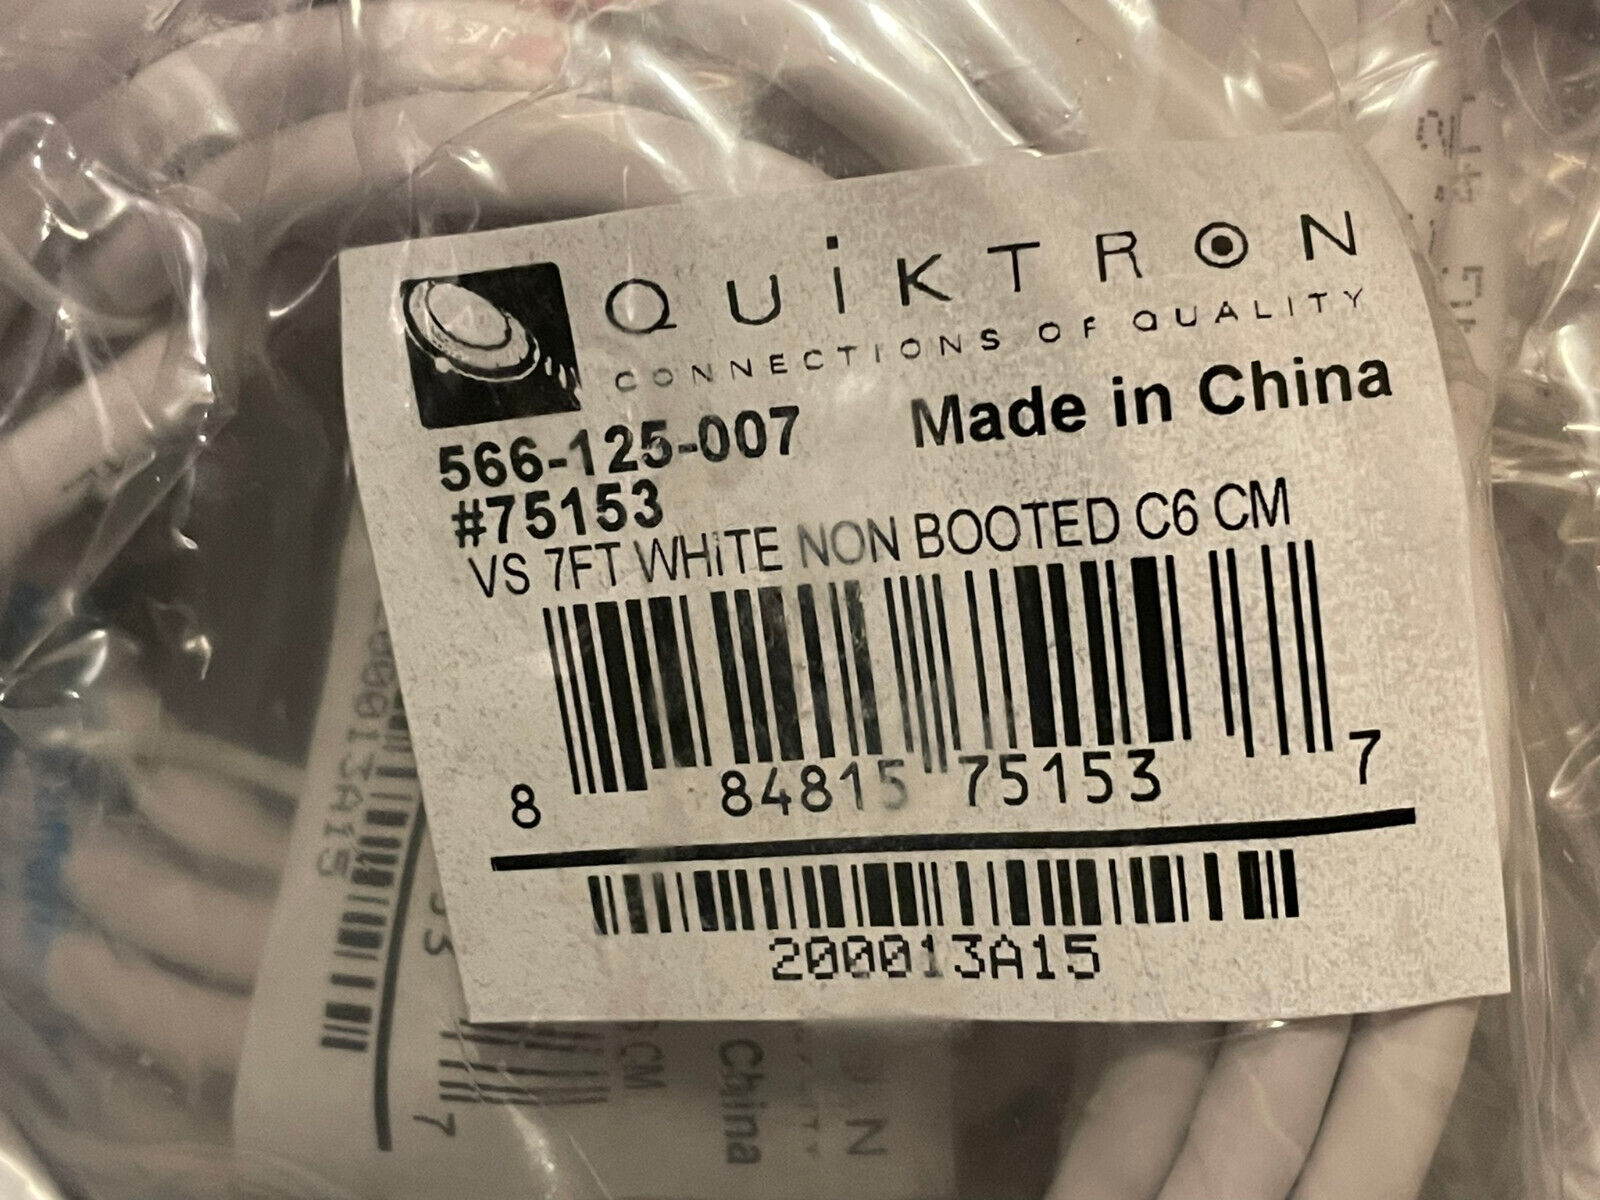 Lot of 100 Quiktron CAT6 Patch Cable 566-125-007 7Ft White Non Booted #75153